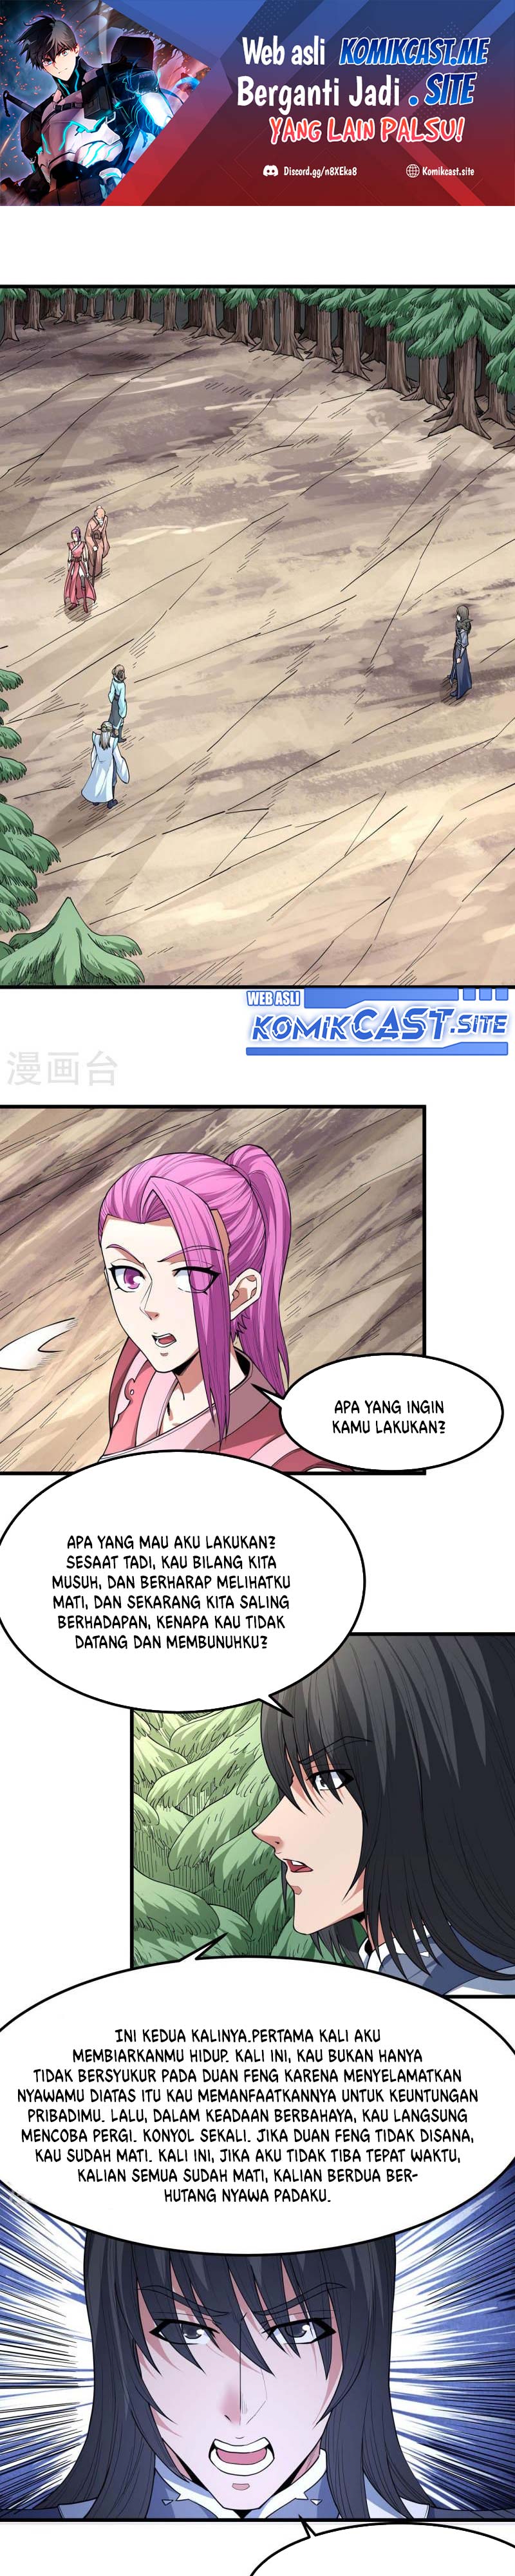 God of Martial Arts Chapter 514